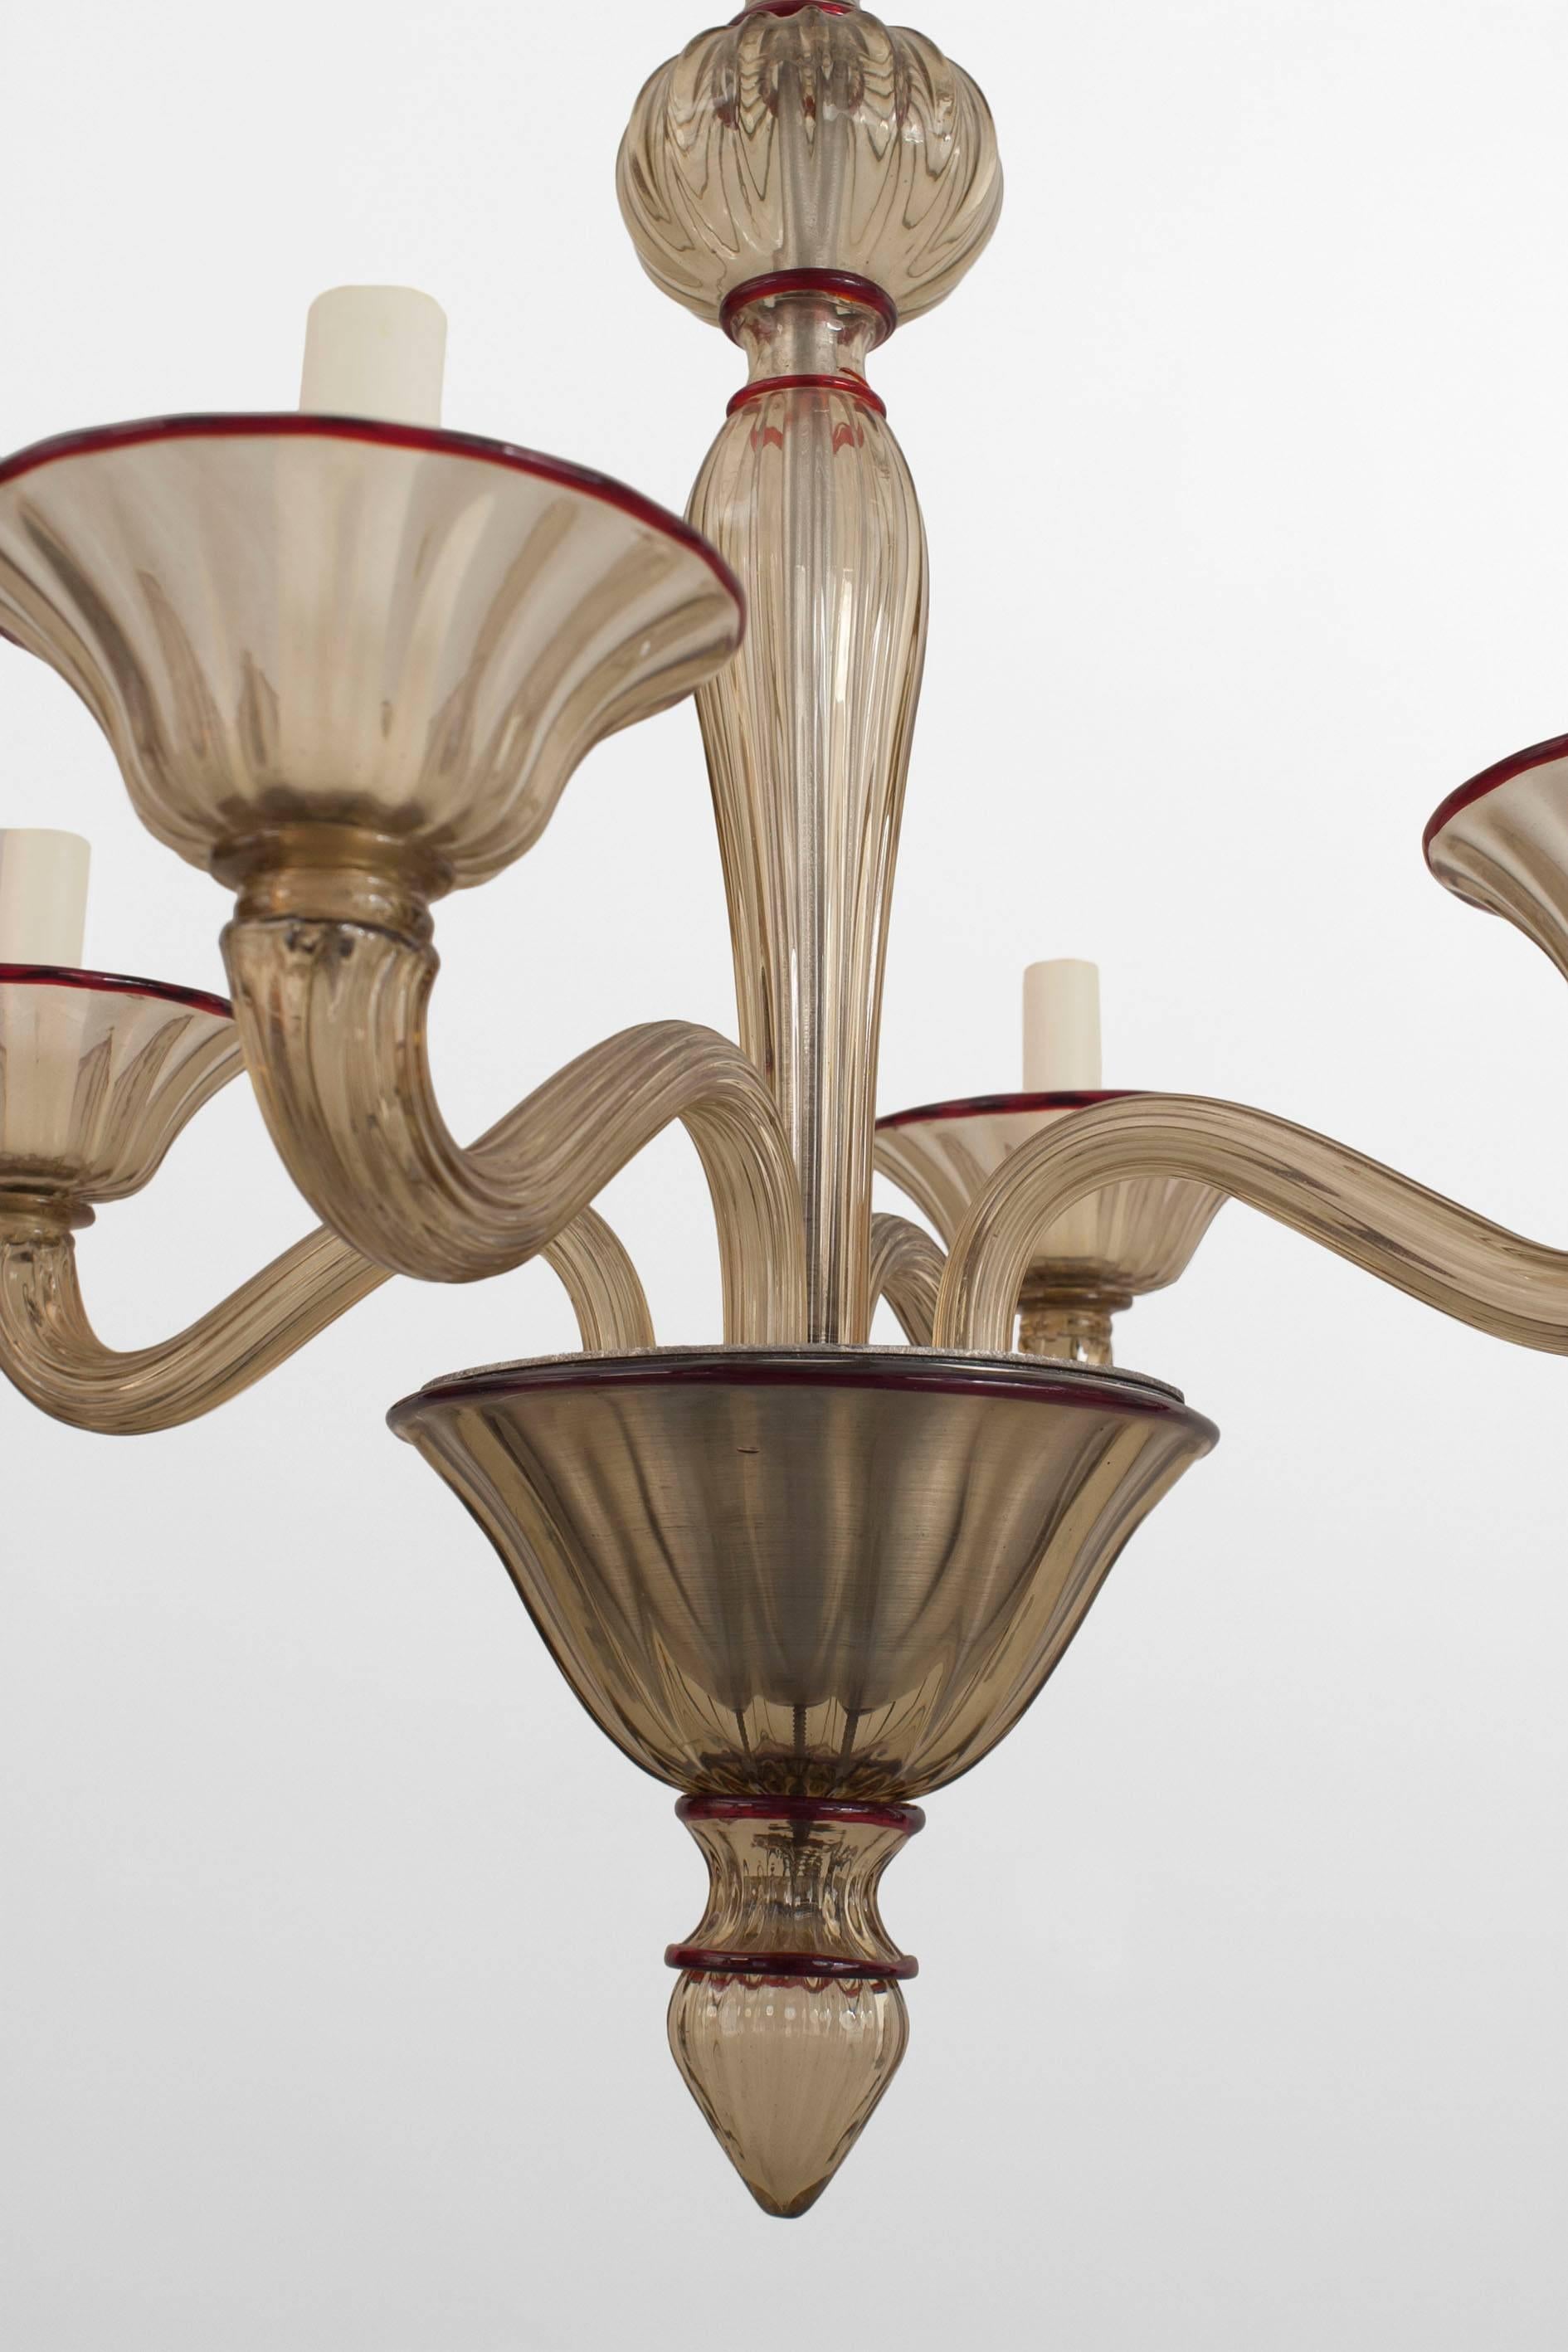 Italian 1940s amber glass chandelier with four arms emanating from a tiered centre post and cup bobeches with applied red glass trim (by Venini).

 